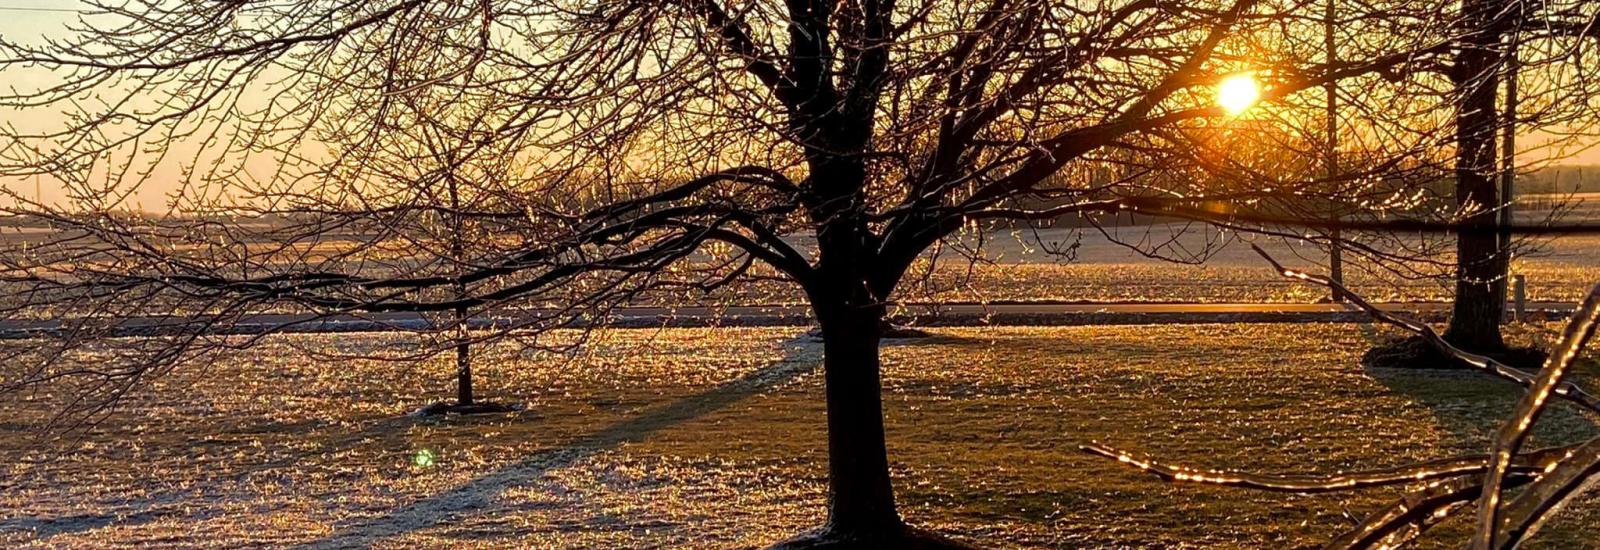 Sunrise with ice in trees and on grass